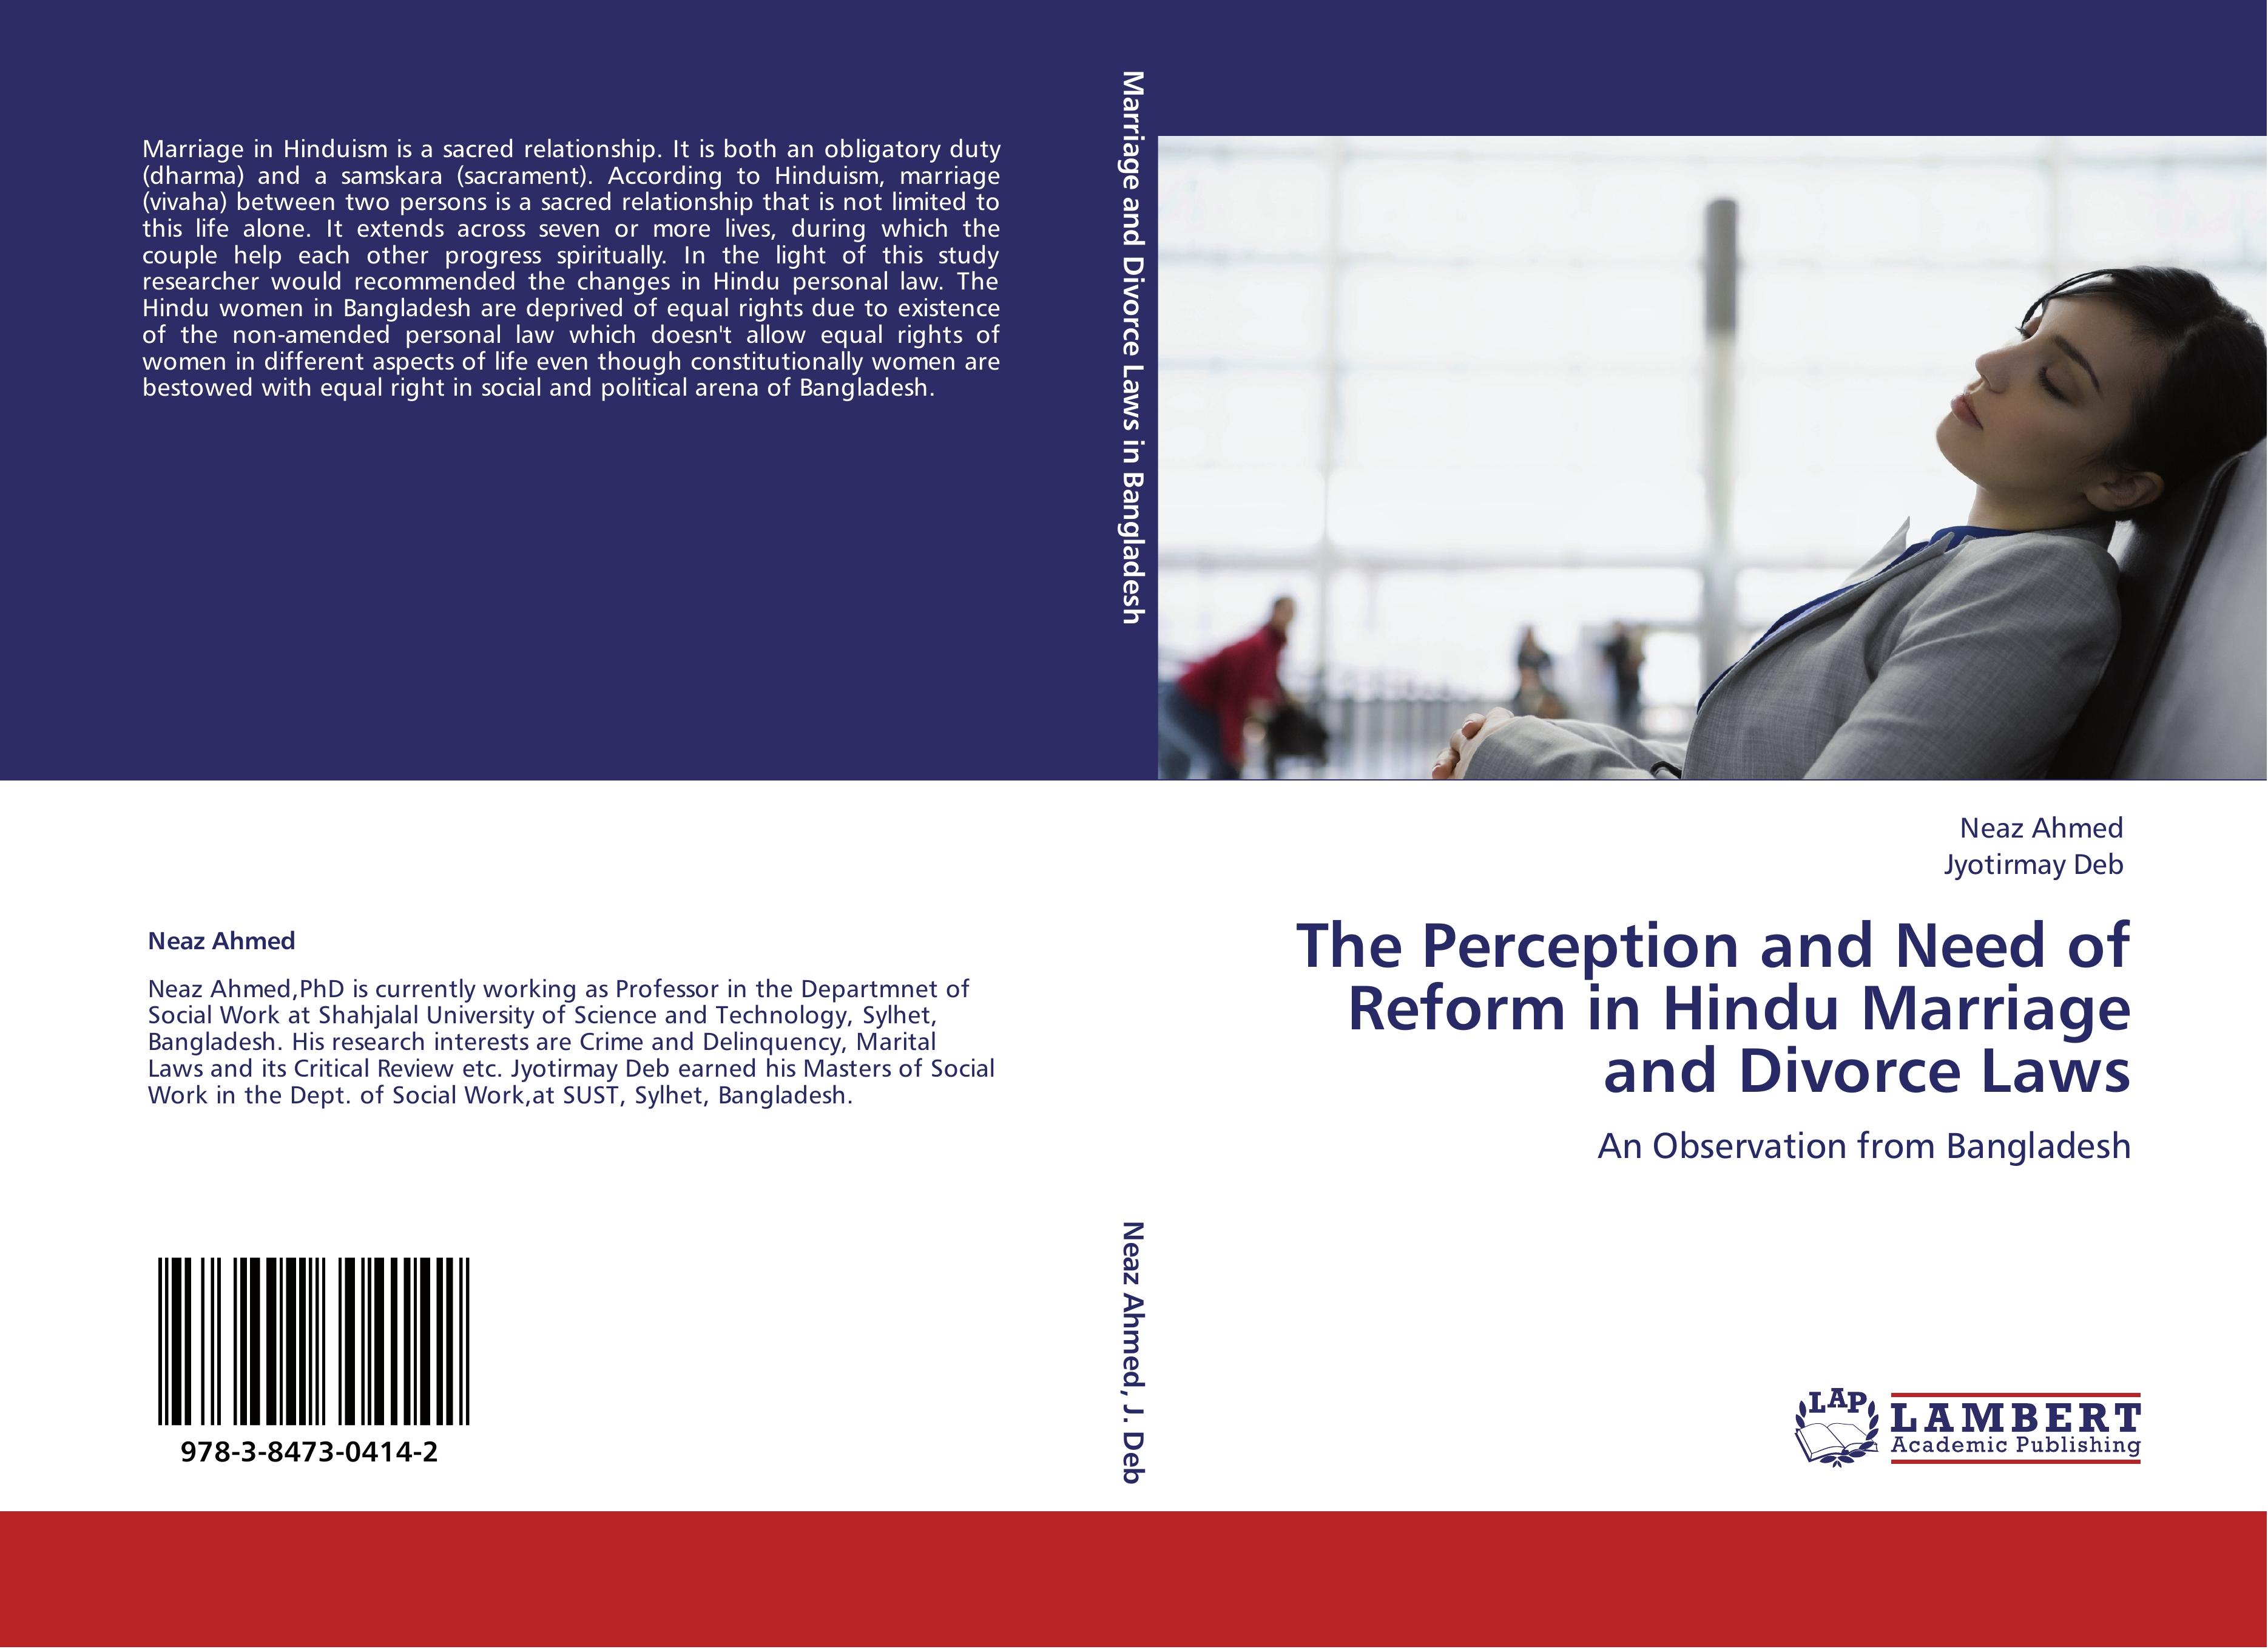 The Perception and Need of Reform in Hindu Marriage and Divorce Laws - Neaz Ahmed Jyotirmay Deb